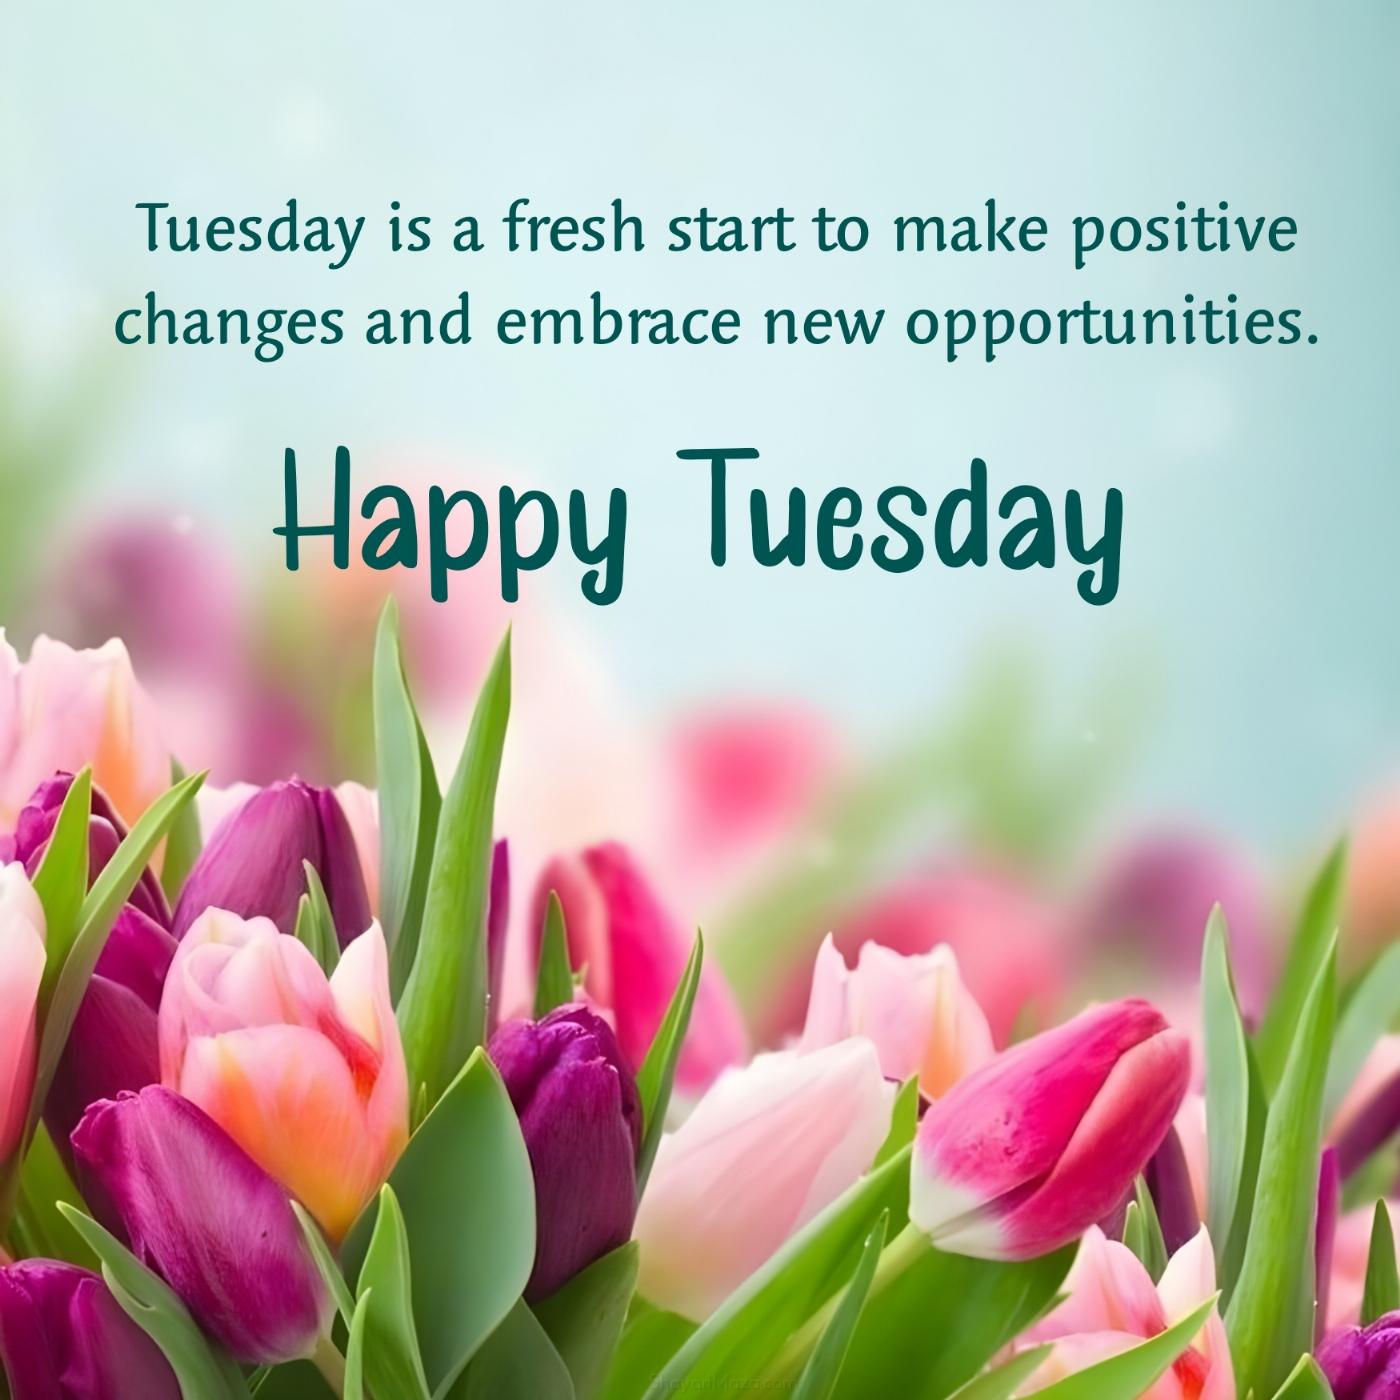 Tuesday is a fresh start to make positive changes